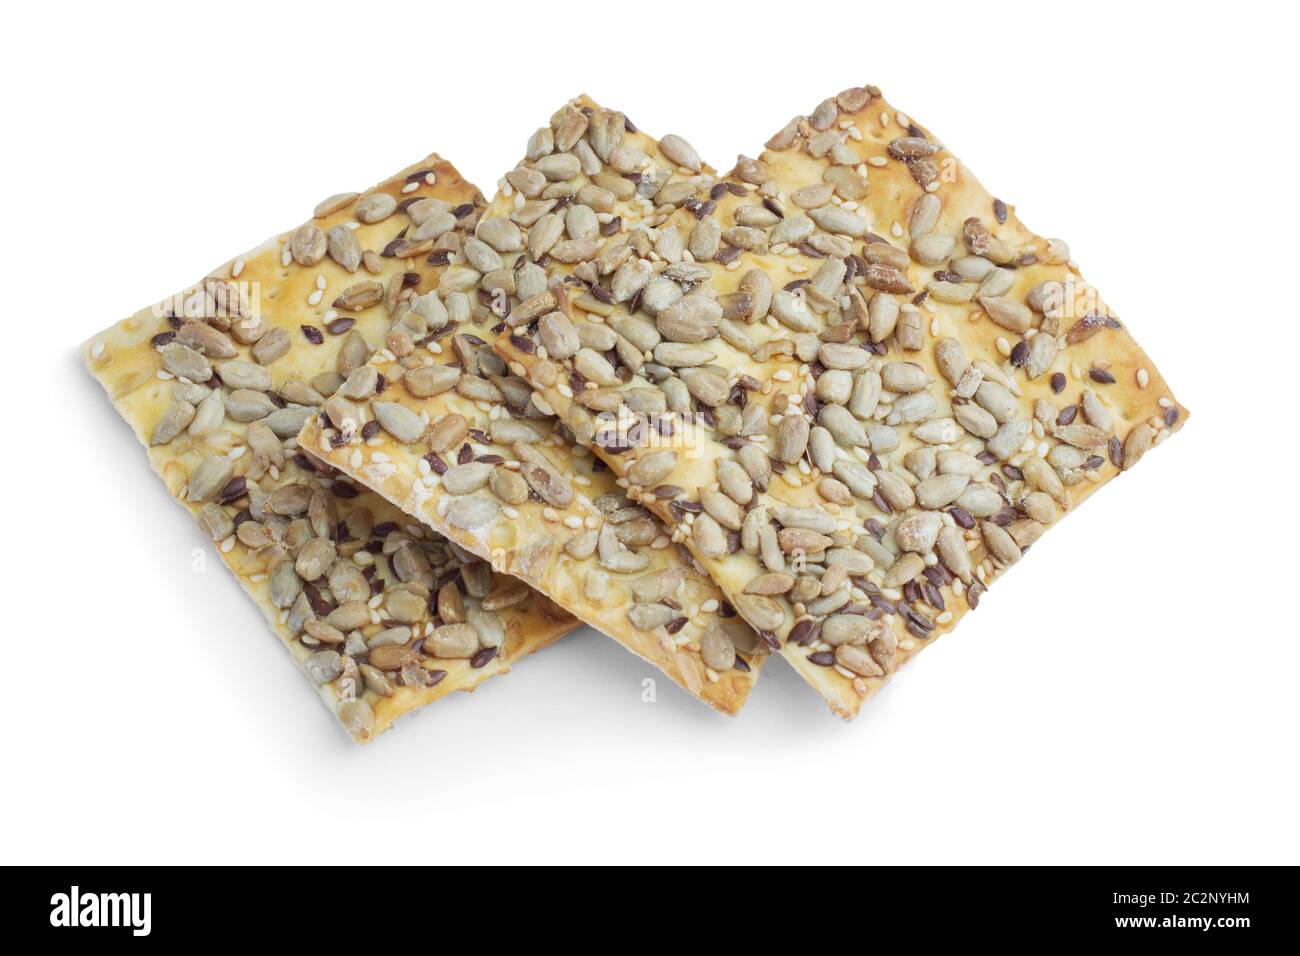 Sugar-free cookies with sunflower seeds, diabetic food Stock Photo